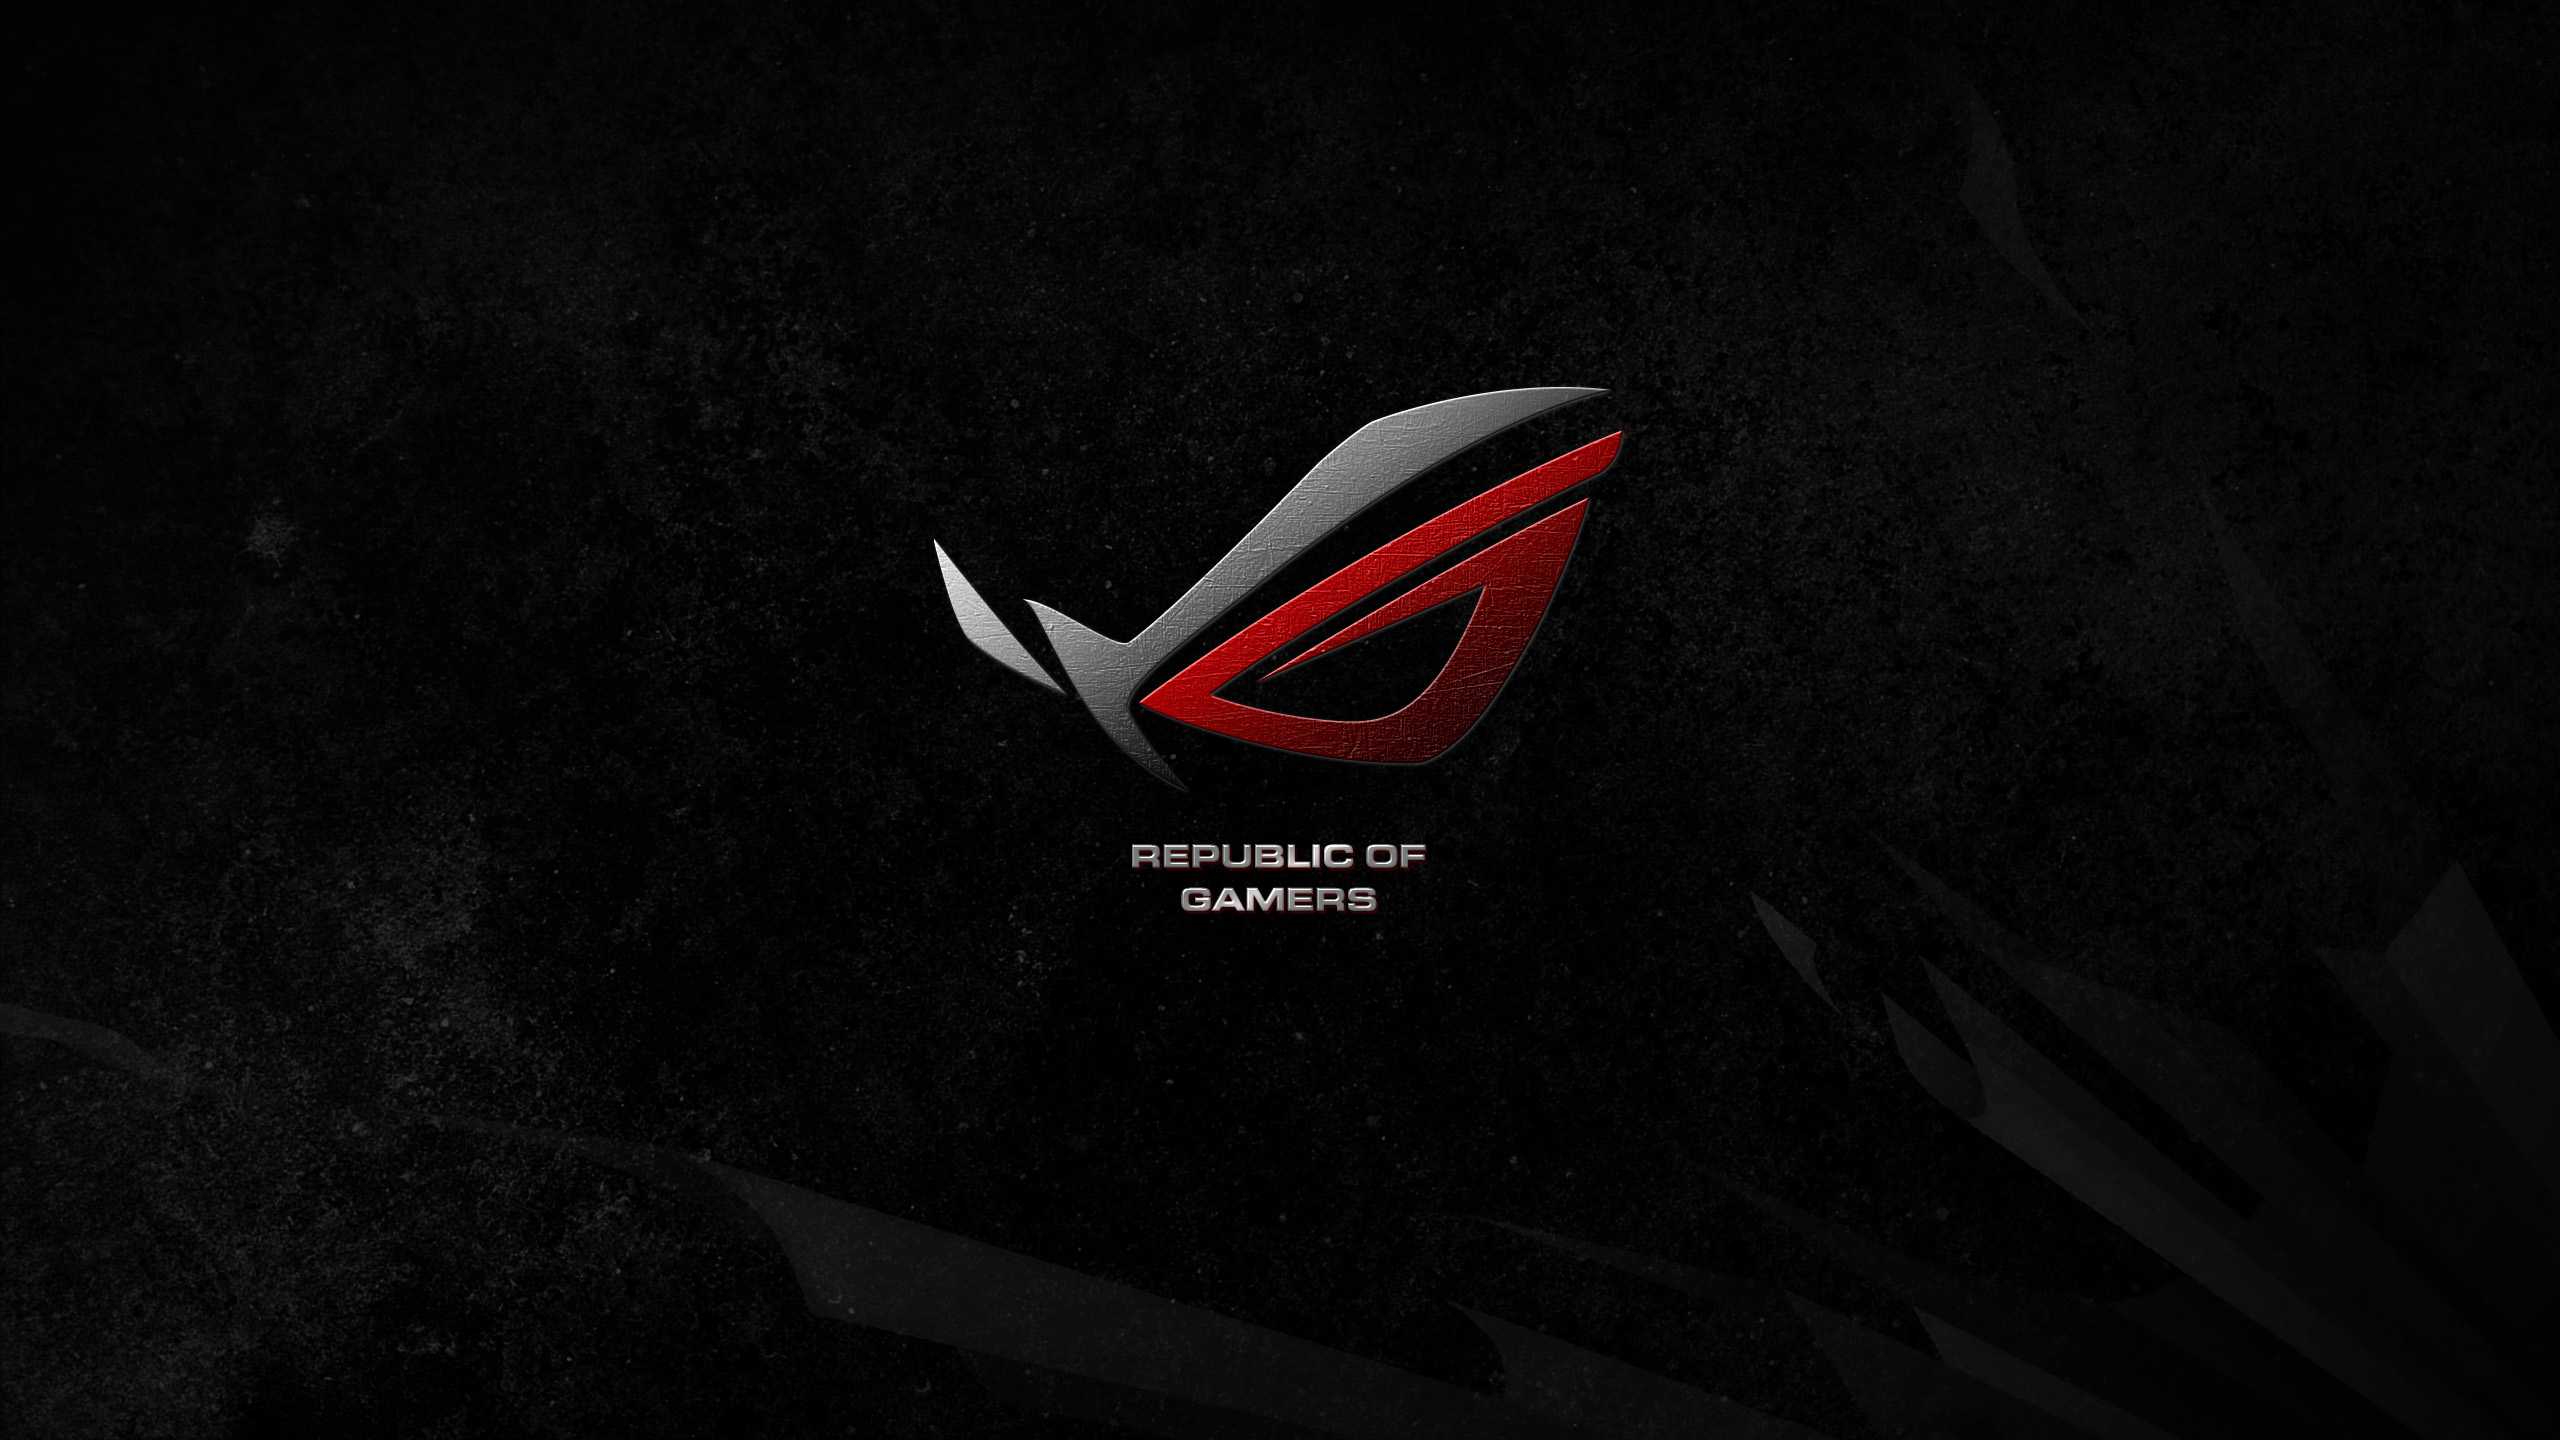 Asus Rog Images TheCelebrityPix 2560x1440